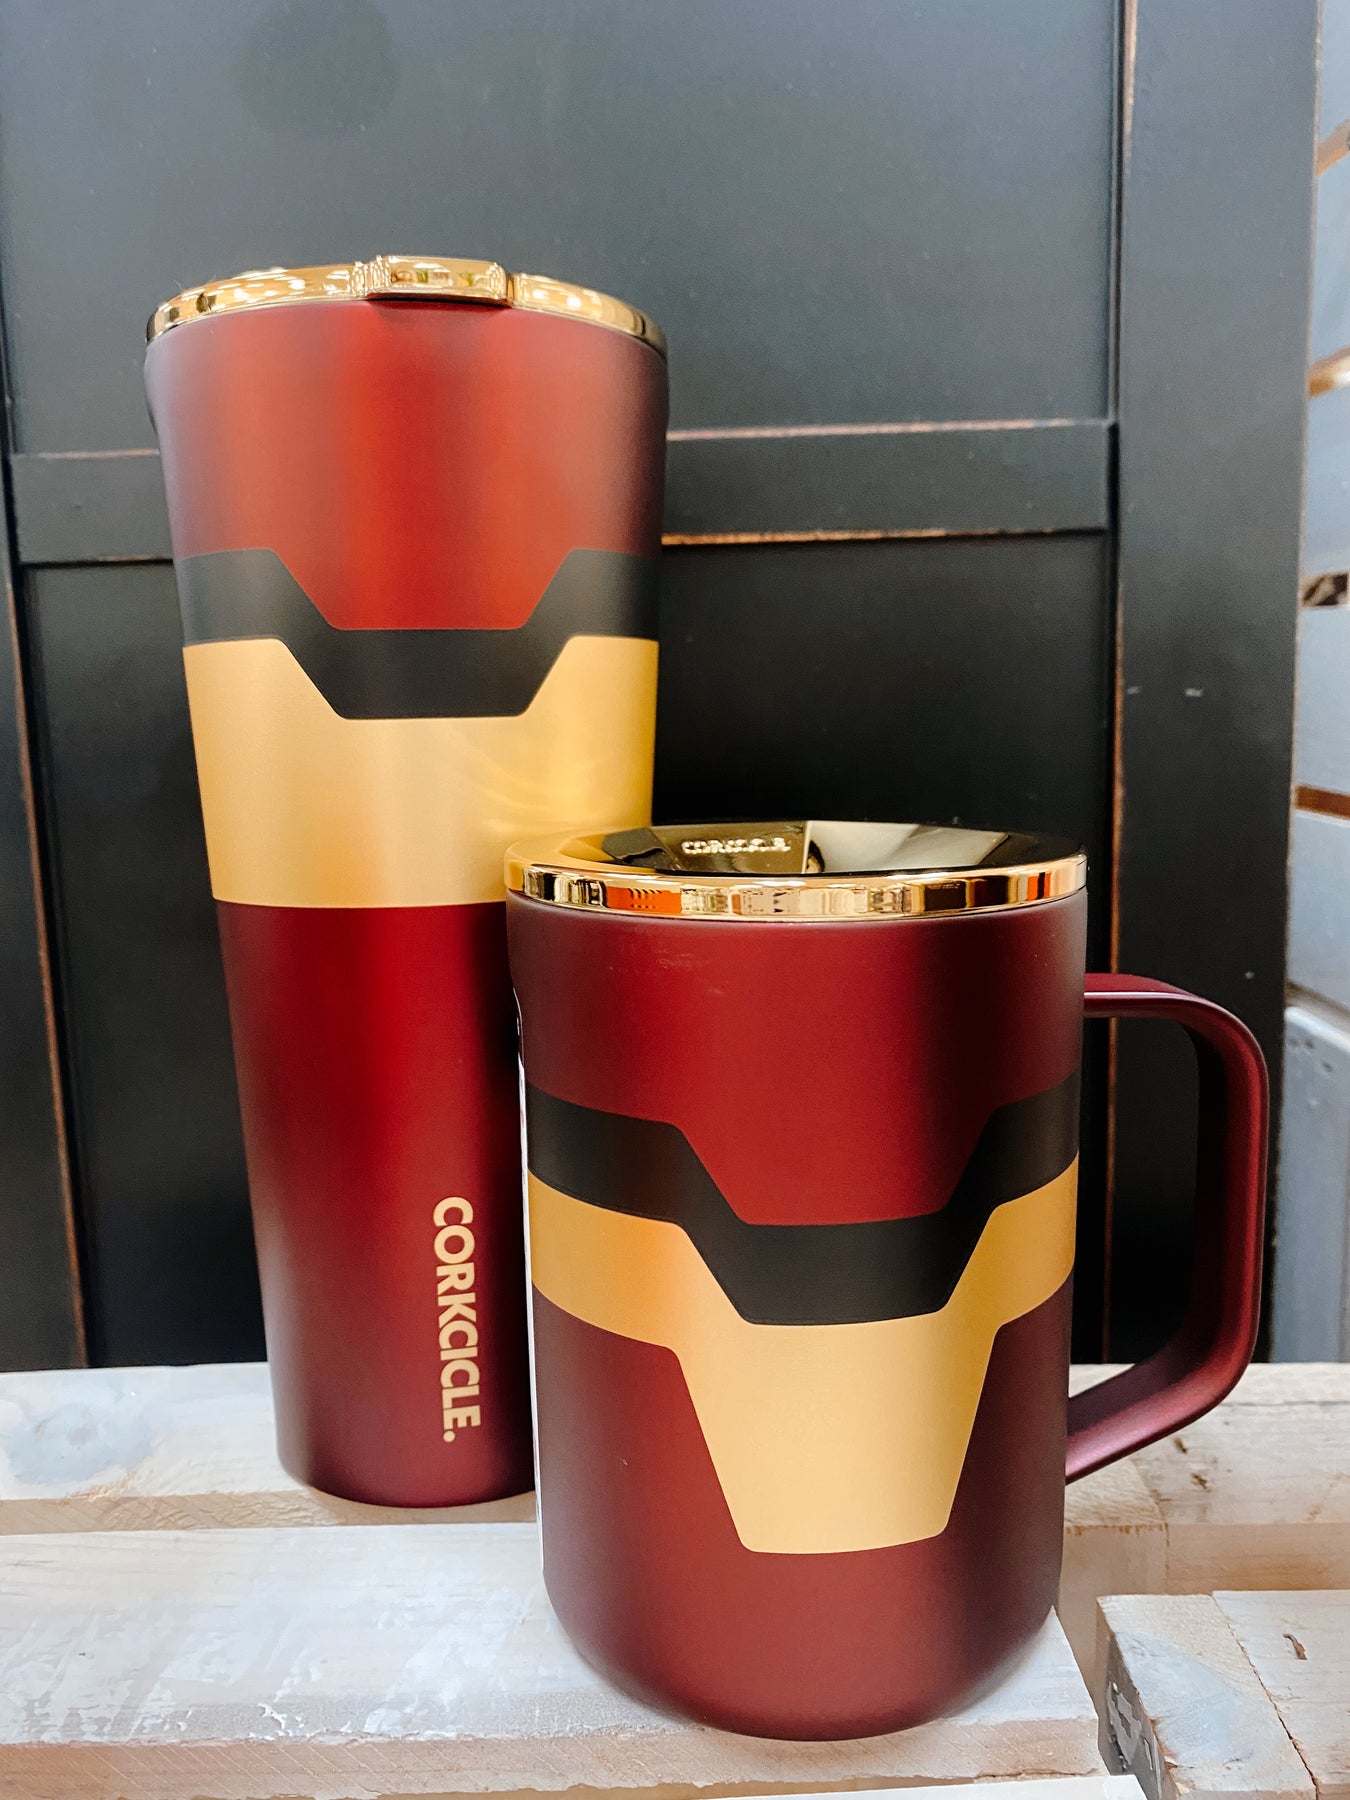 Marvel Stainless Steel Mug by Corkcicle